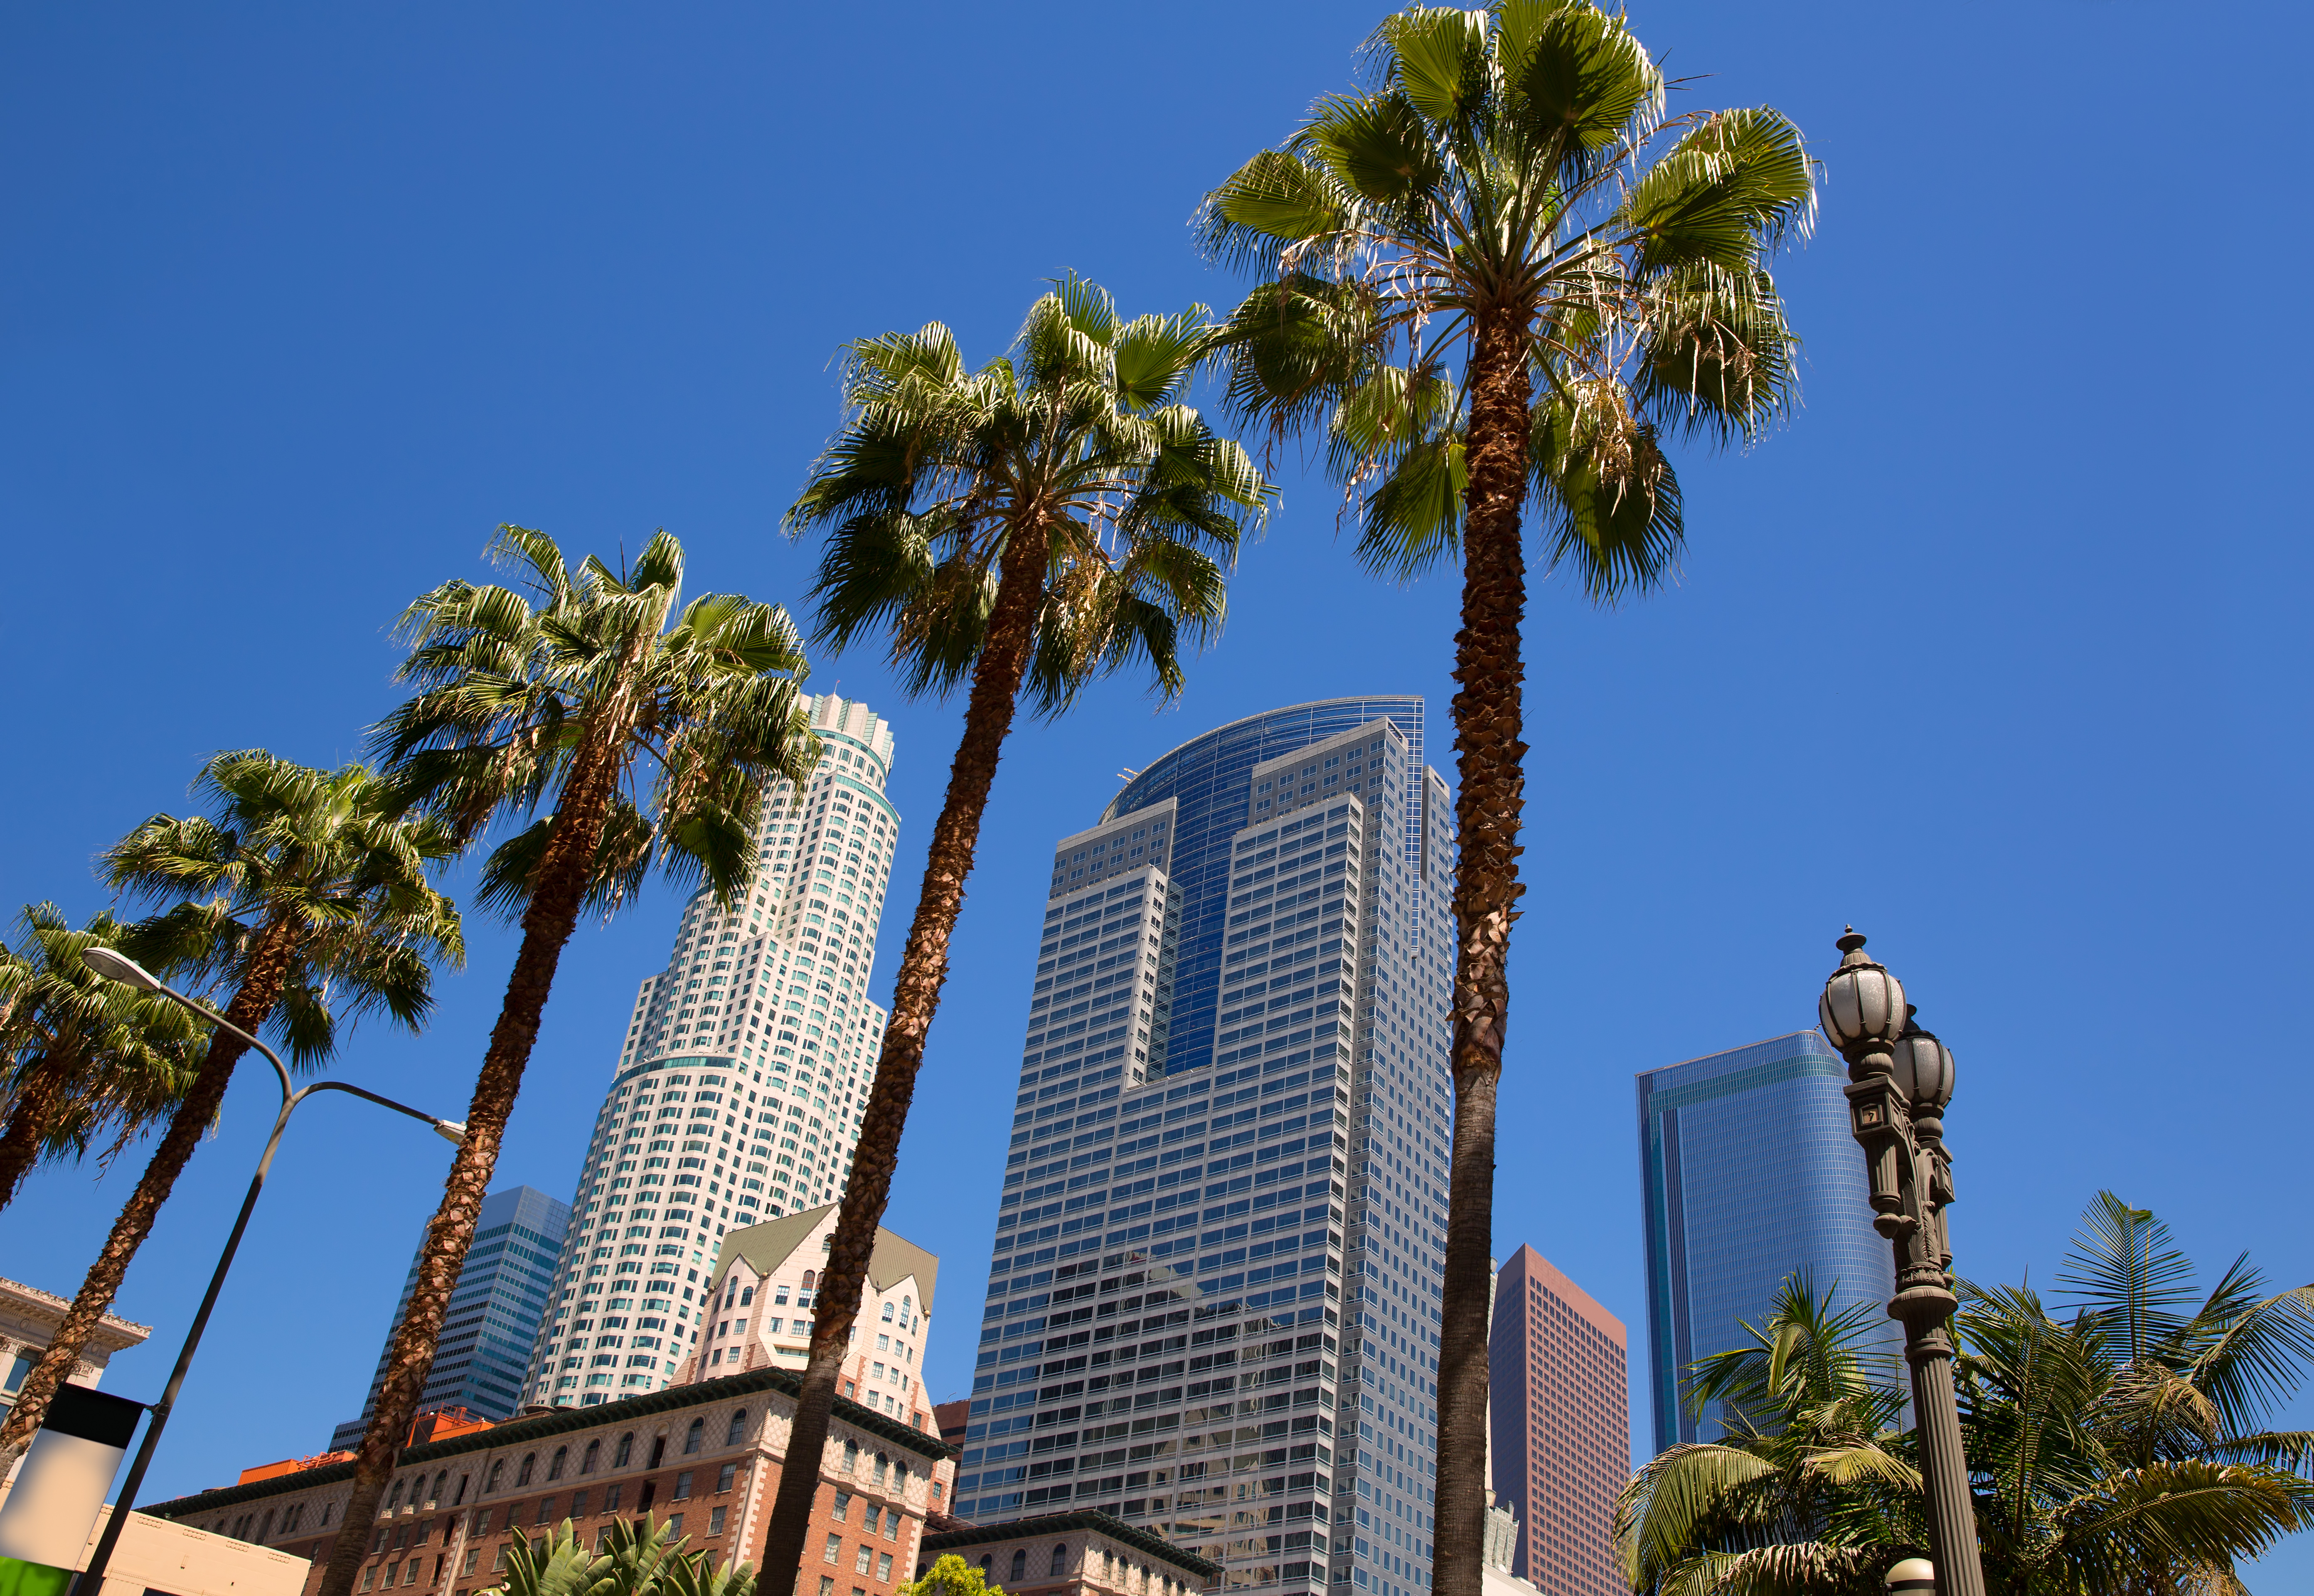 LA Downtown Los Angeles Pershing Square palm tress and skyscrapers